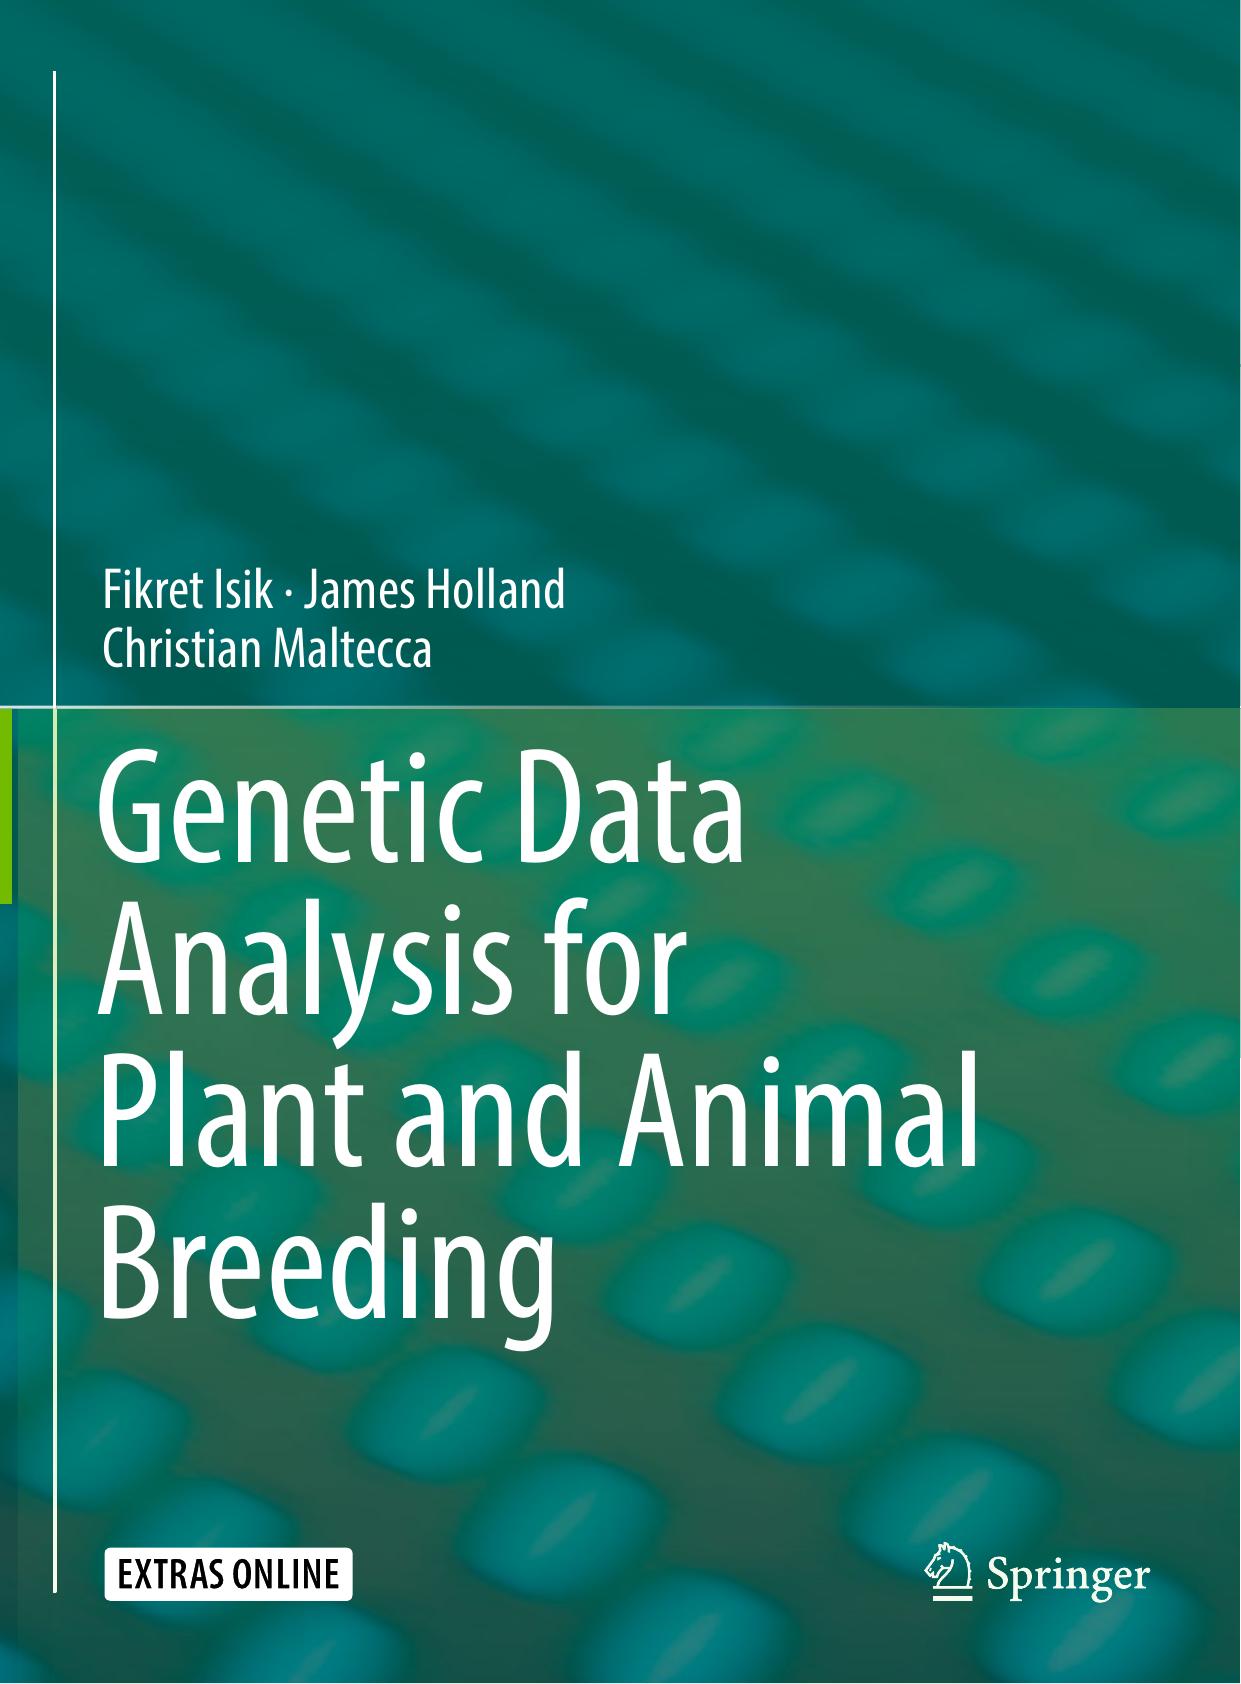 Genetic data analysis for plant and animal breeding 2017